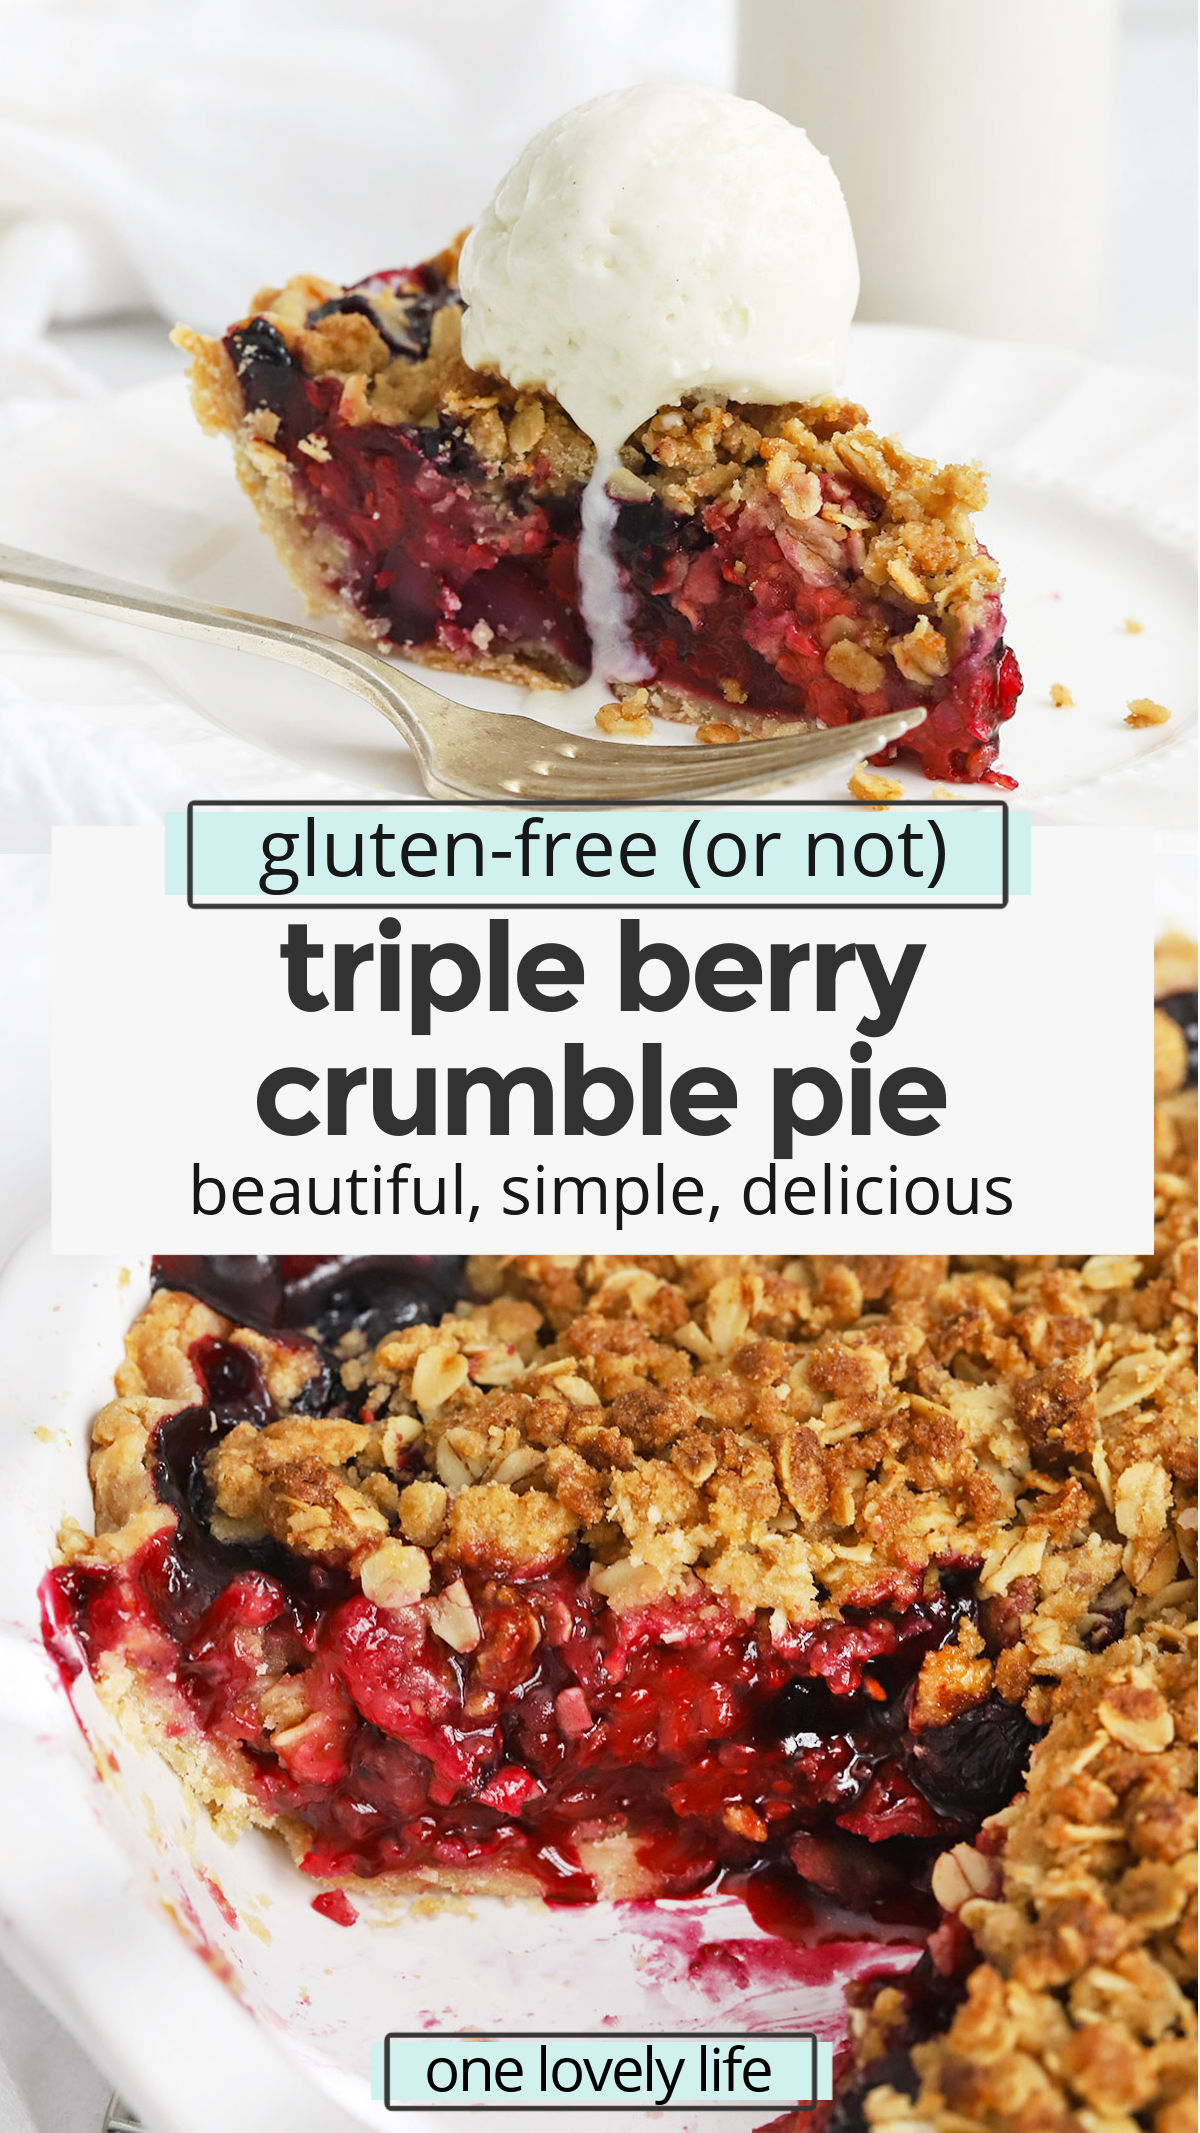 Triple Berry Crumble Pie - This berry crumble pie features a bright, tangy berry filling & gorgeous crumble topping you'll fall in love with at first bite! (Gluten-Free, Vegan-Friendly) // Berry Pie recipe // Mixed berry pie // mixed berry crumble pie // triple berry pie // berry pie with oat topping // gluten free pie // vegan pie // thanksgiving pie // christmas pie // 4th of July dessert // berry pie recipe